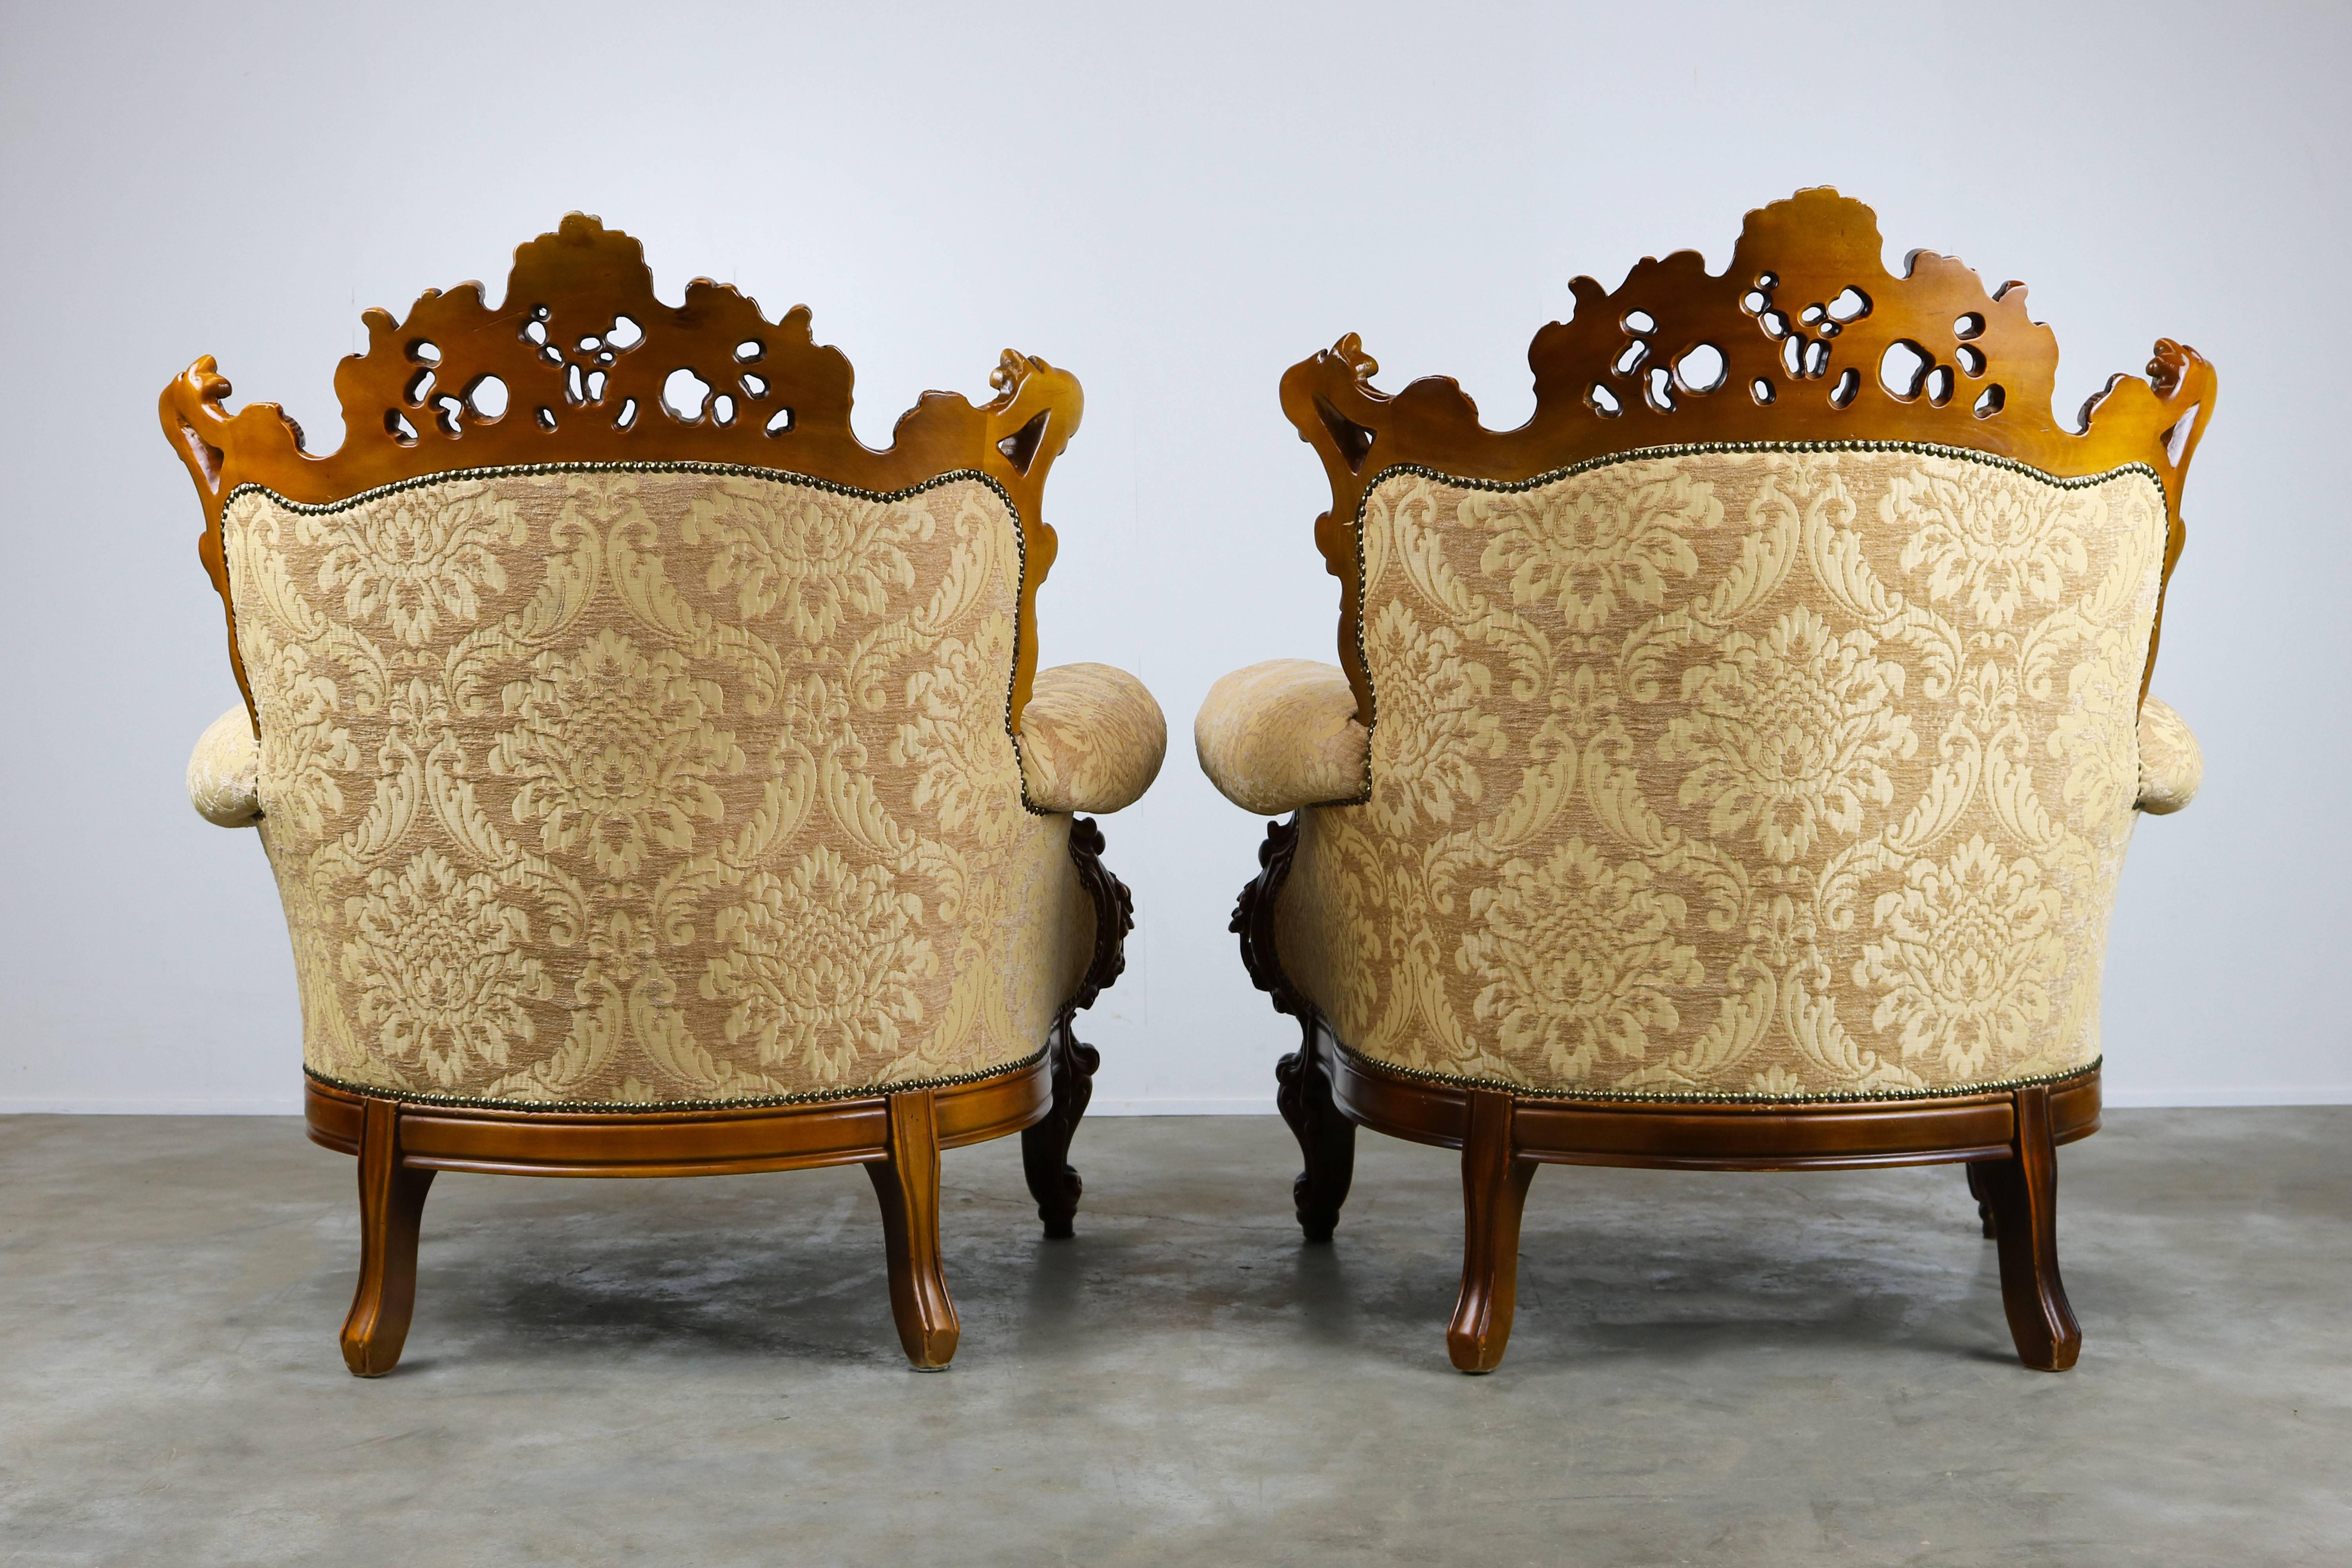 Luxurious Antique Italian Lounge Chairs in Rococo / Baroque Style Brown Beige In Good Condition For Sale In Ijzendijke, NL